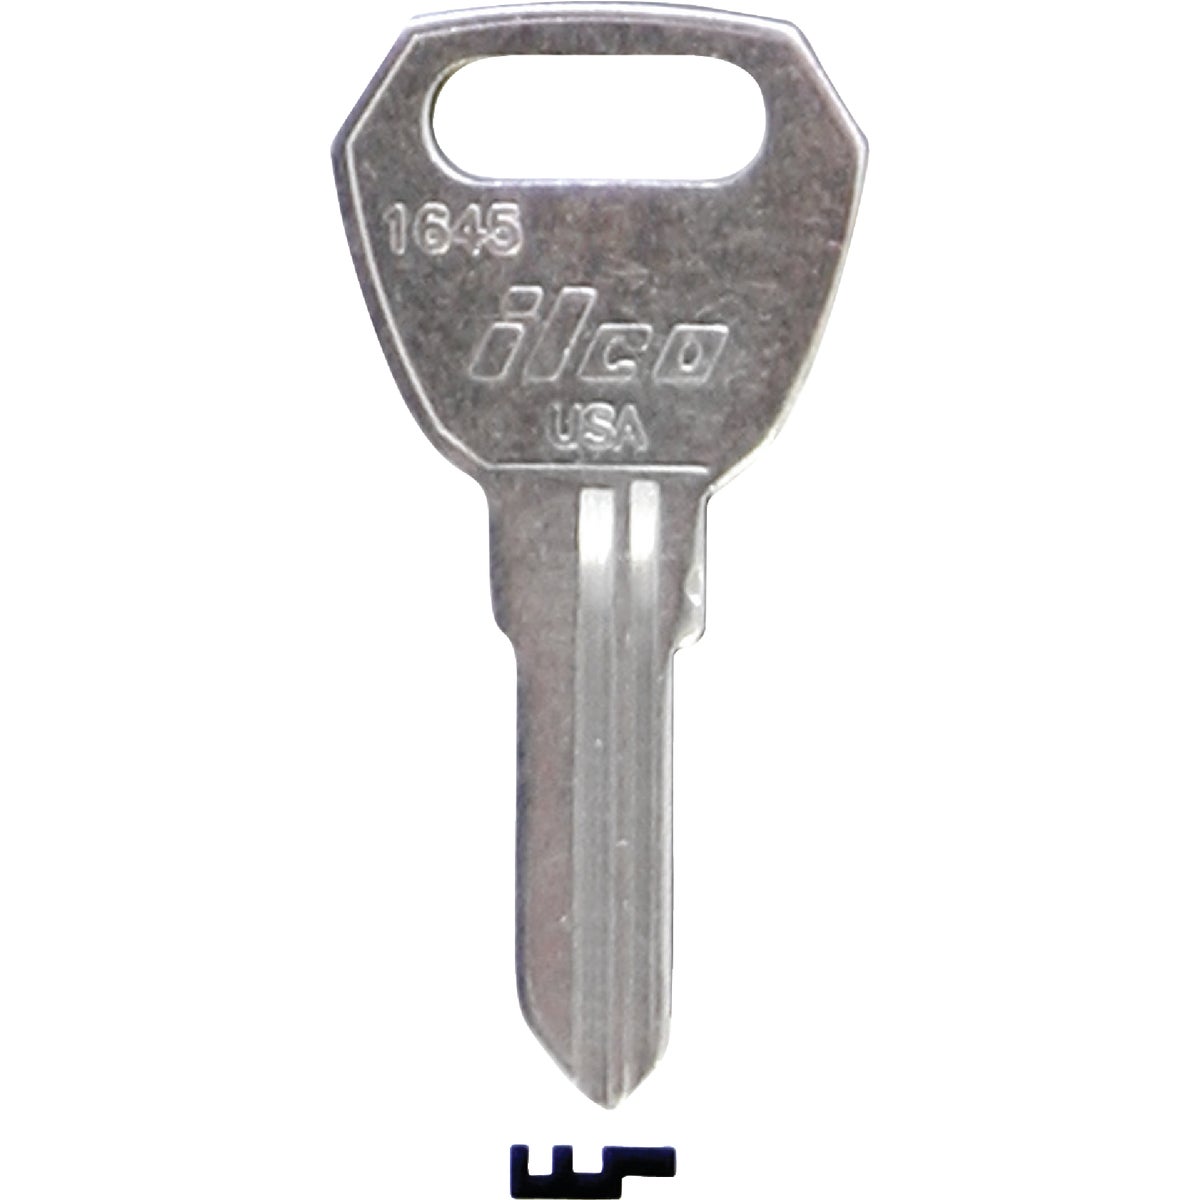 ILCO Fulton Nickel Plated Hitch Key, 1645 (10-Pack)